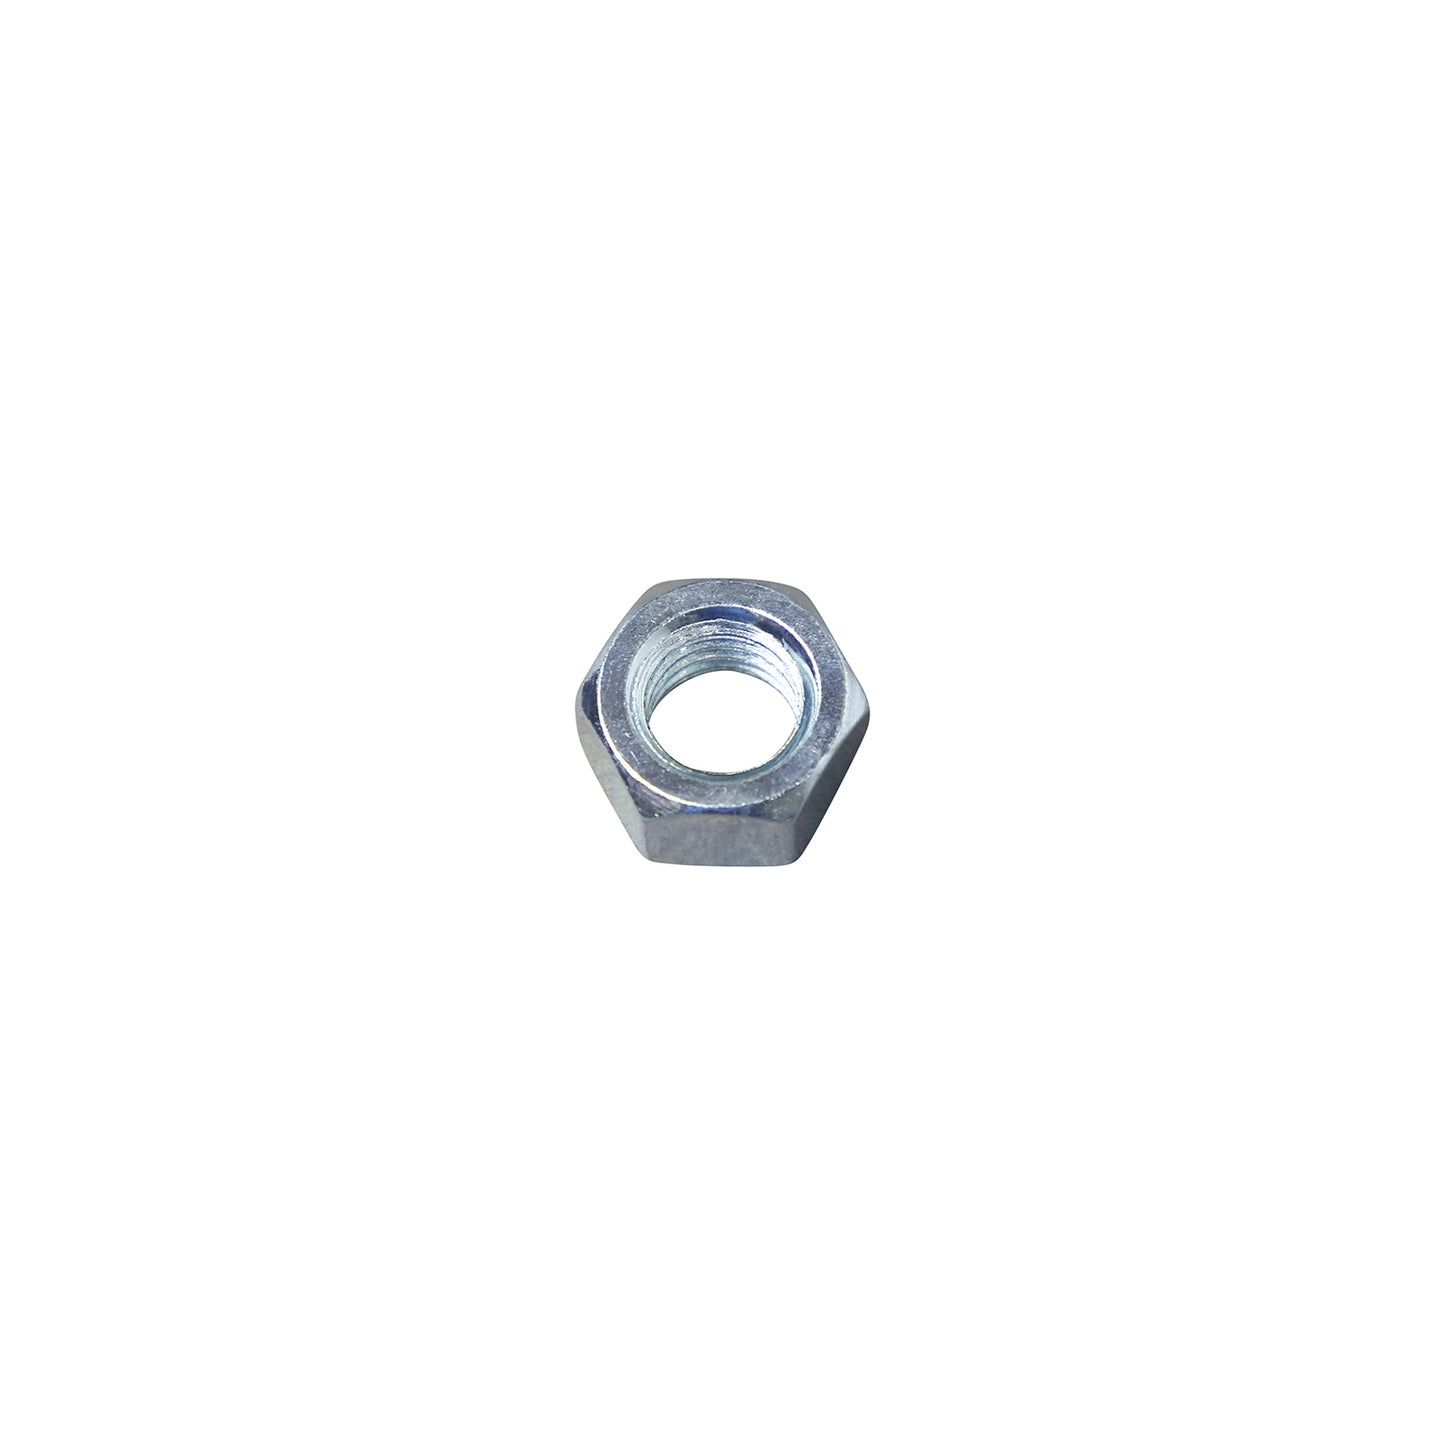 1/2"-13 Conquest Hex Nut - Zinc Plated